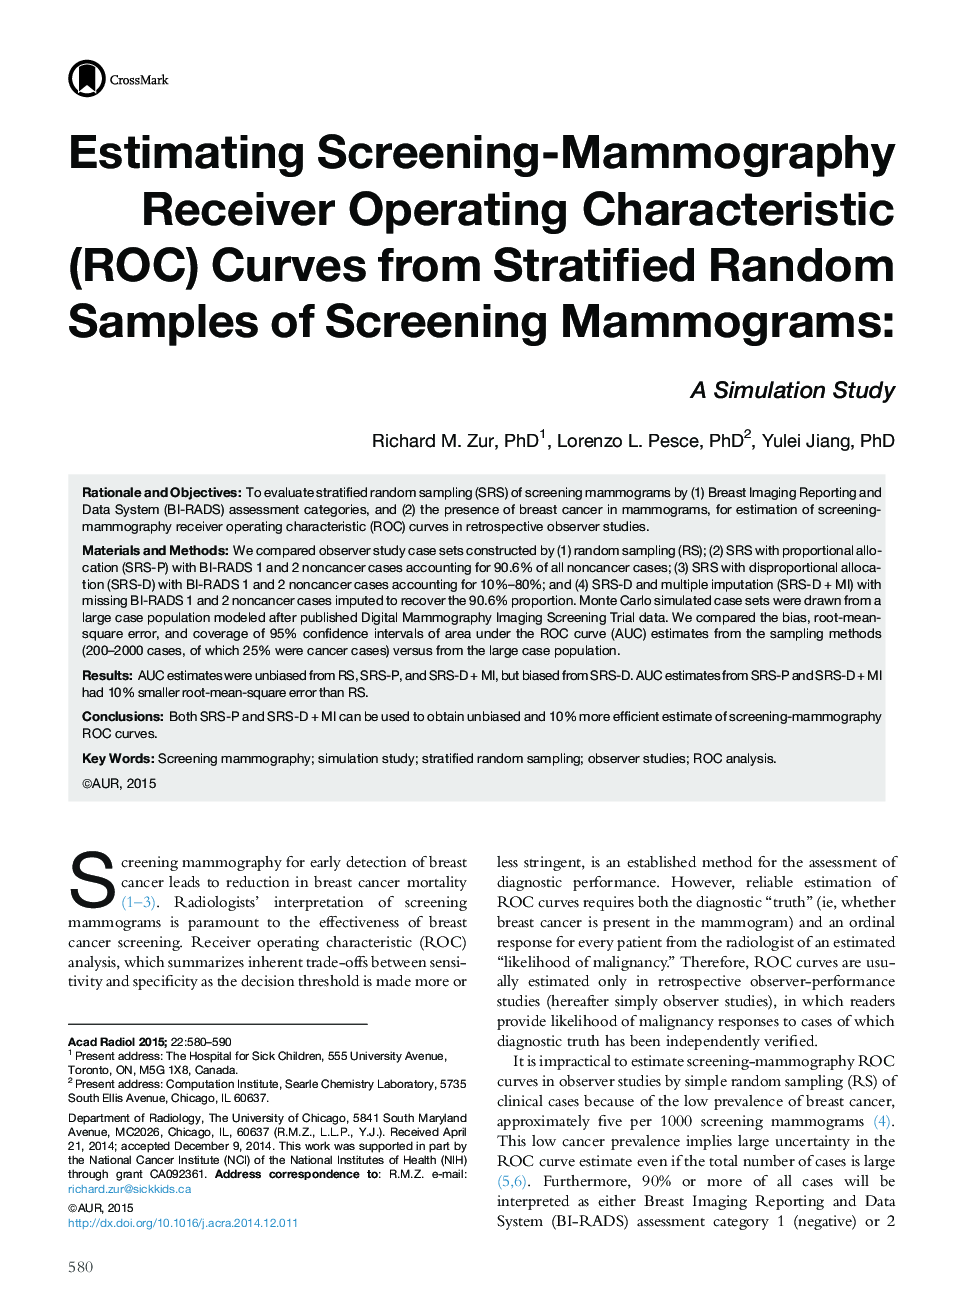 Estimating Screening-Mammography Receiver Operating Characteristic (ROC) Curves from Stratified Random Samples of Screening Mammograms